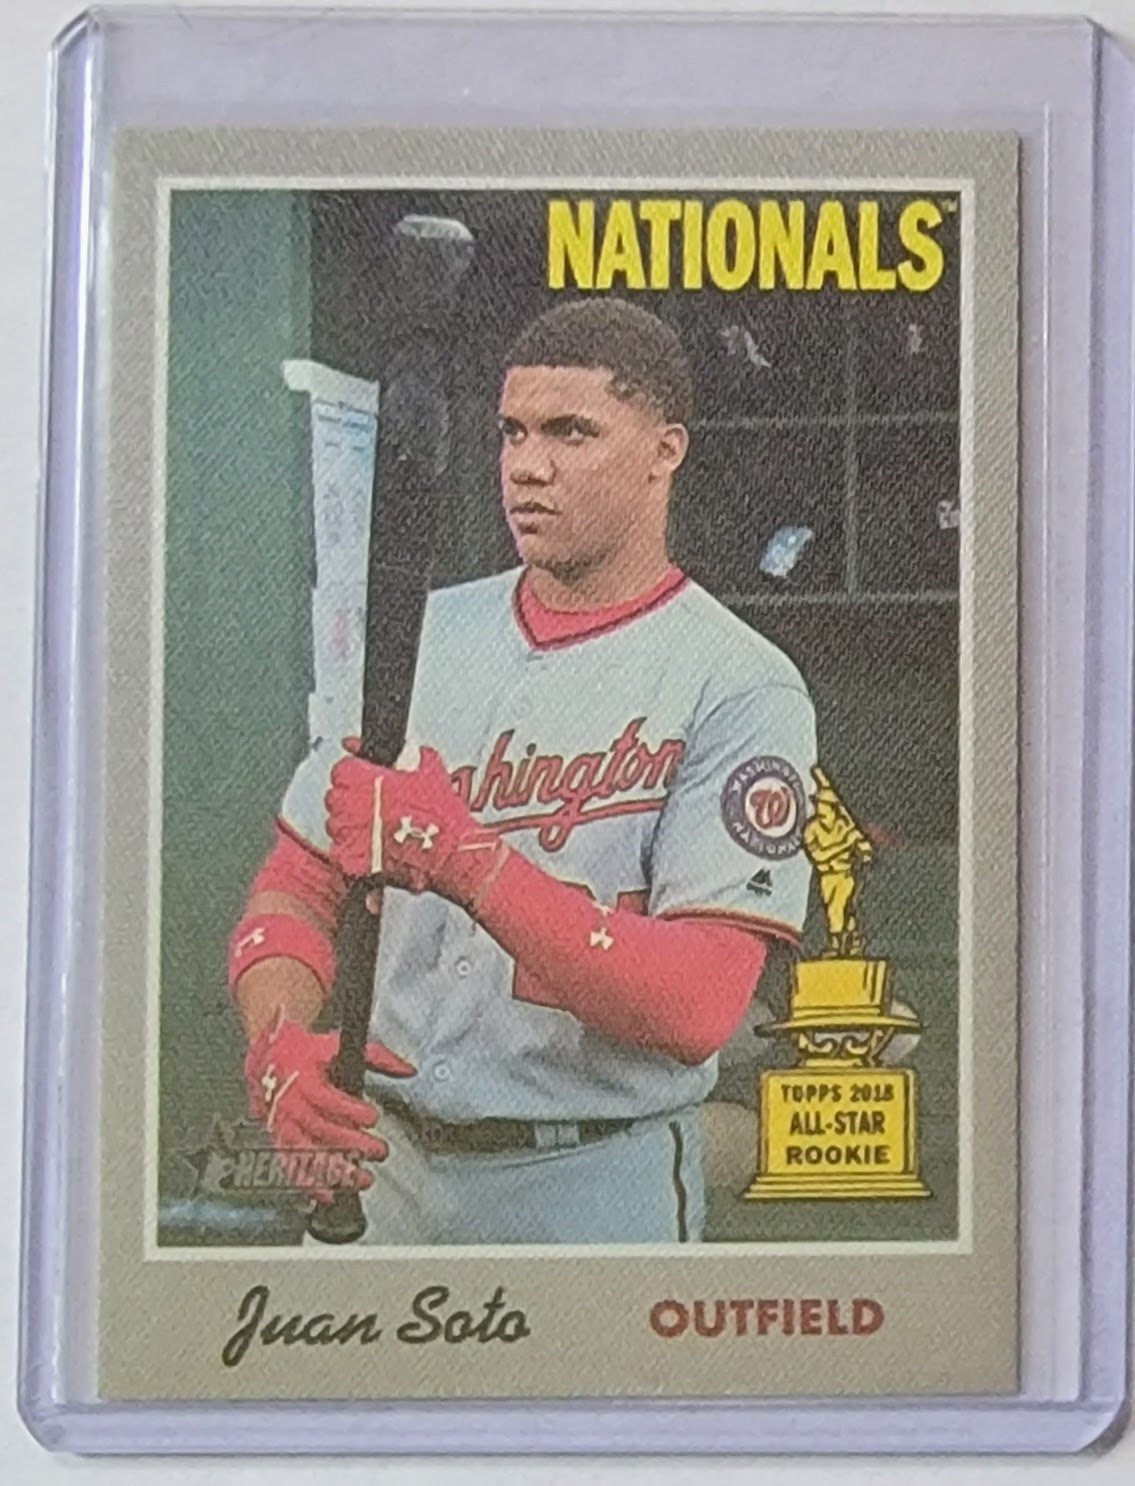 2019 Topps Heritage Juan Soto Cloth All Star Rookie Sticker Baseball Trading Card, 1ea TPTV simple Xclusive Collectibles   